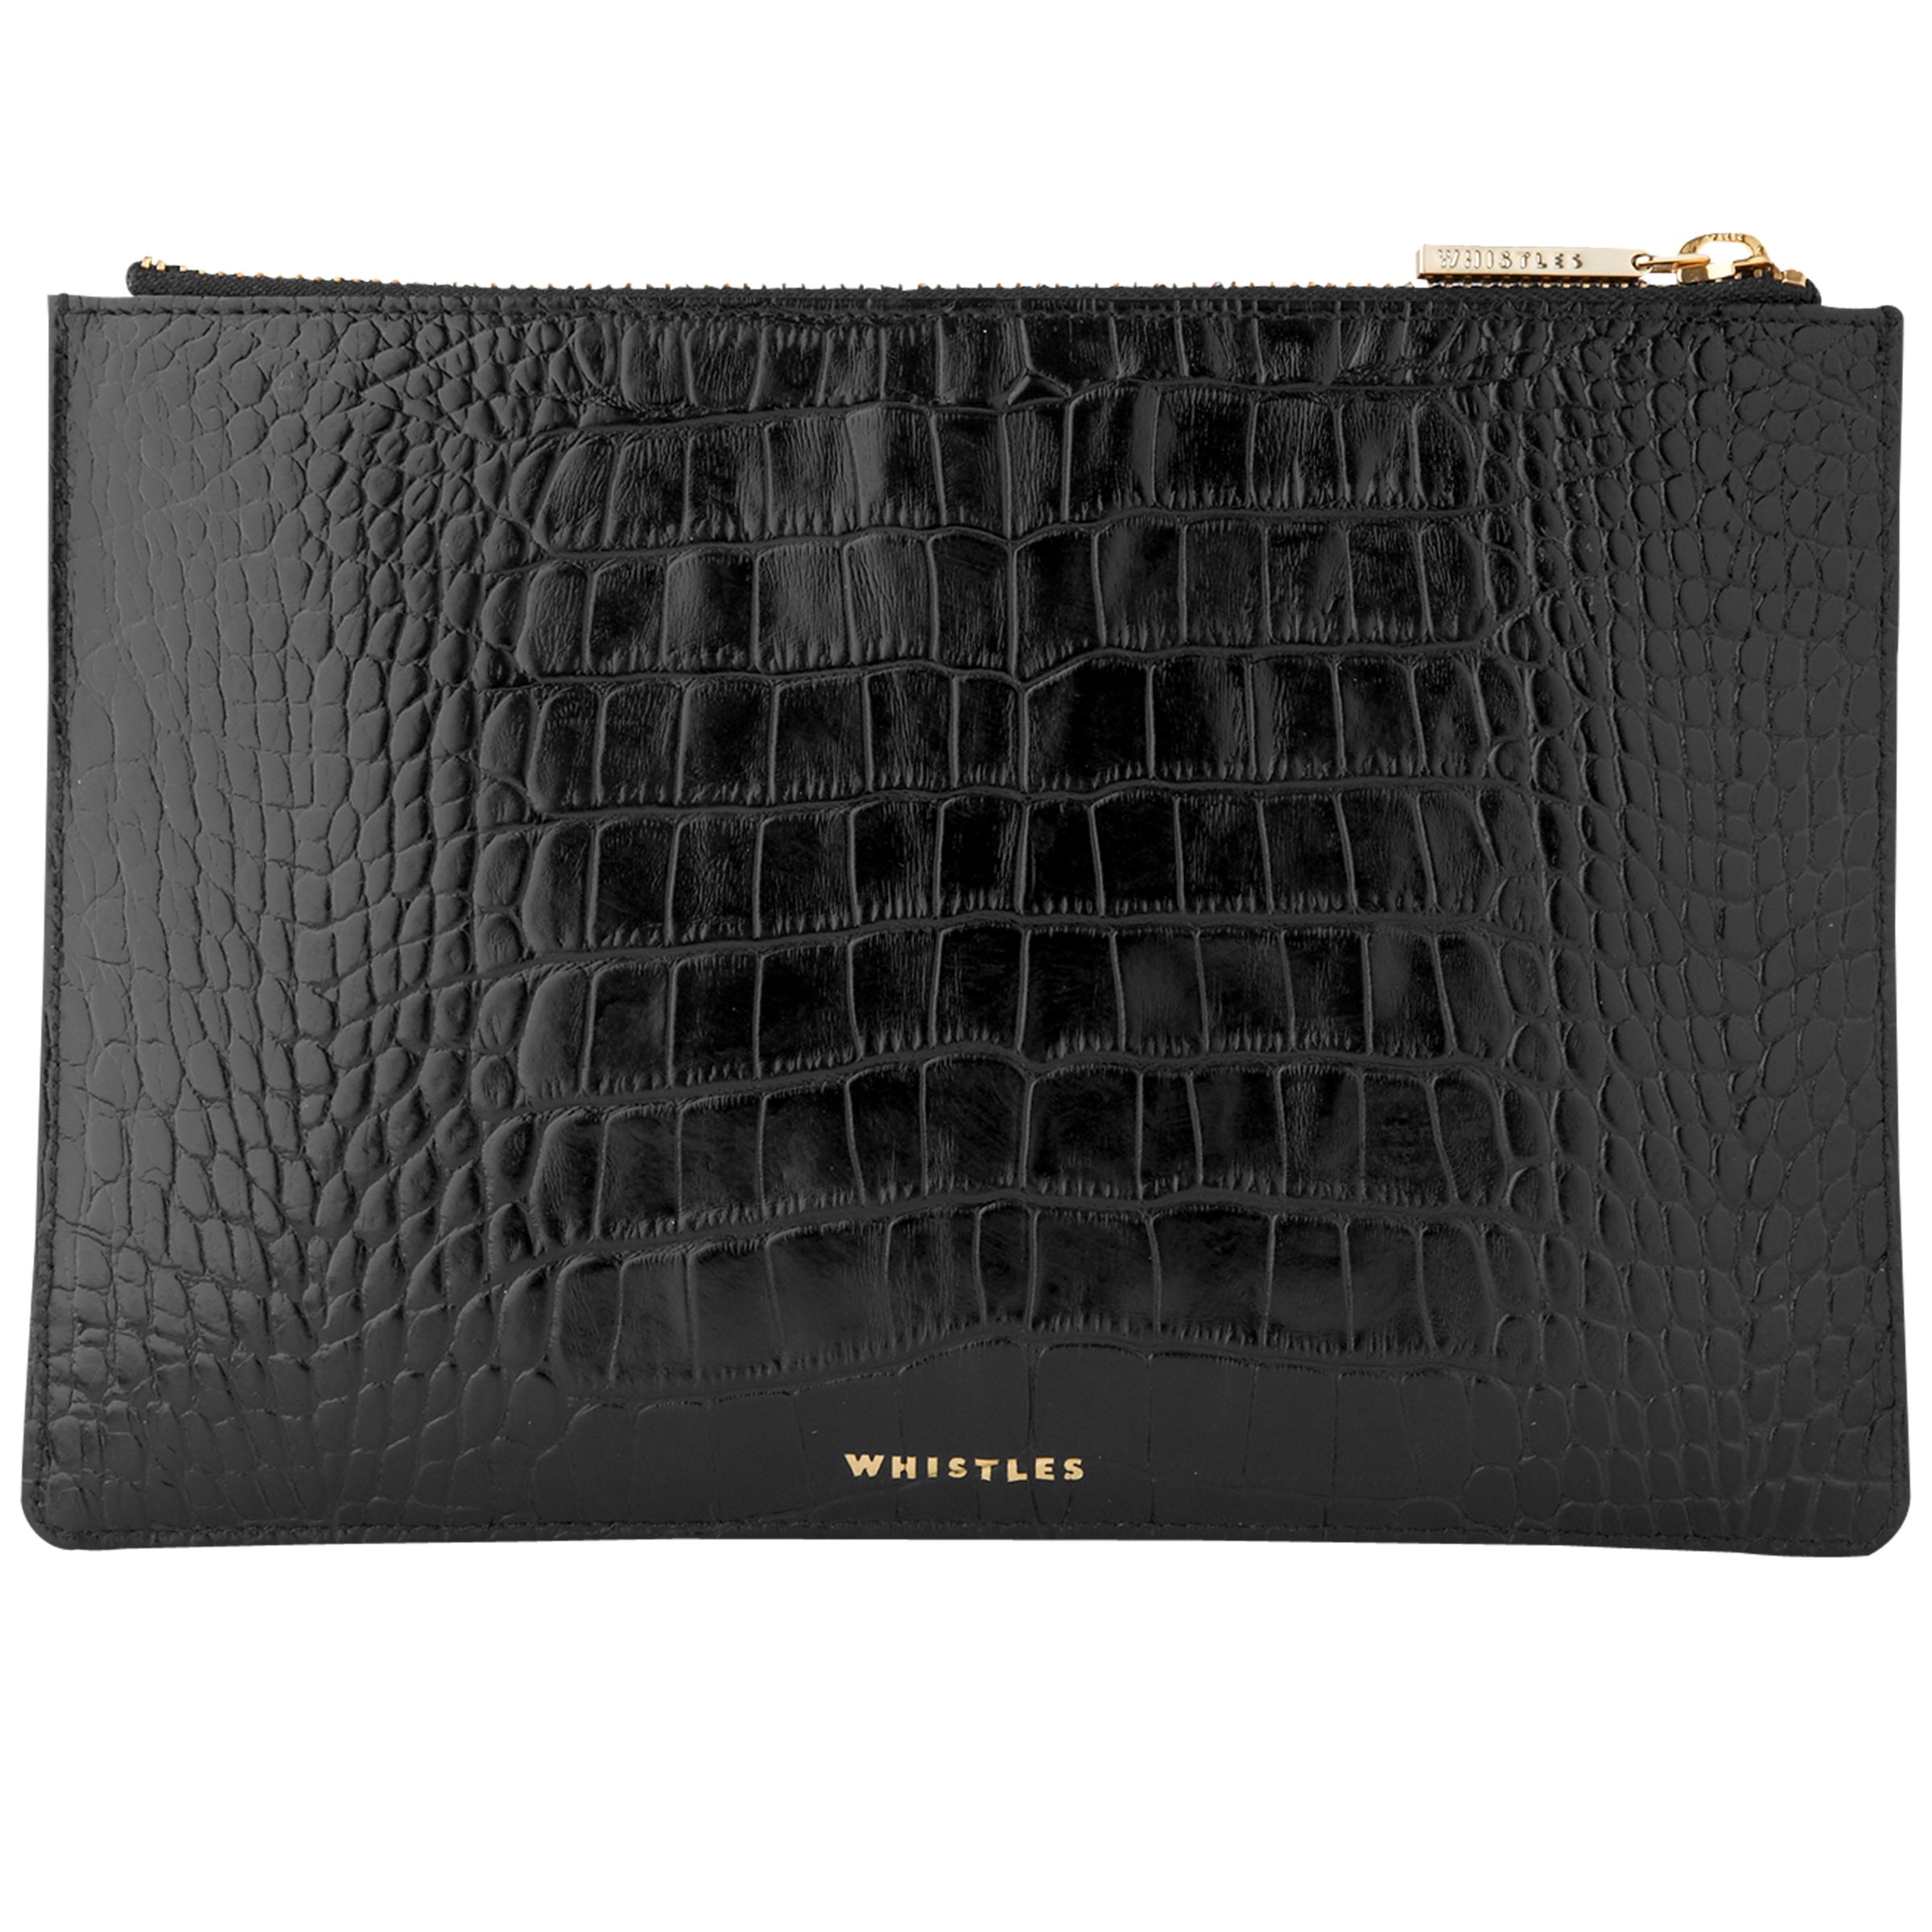 Whistles Shiny Croc Leather Small Clutch Bag, Black at John Lewis & Partners